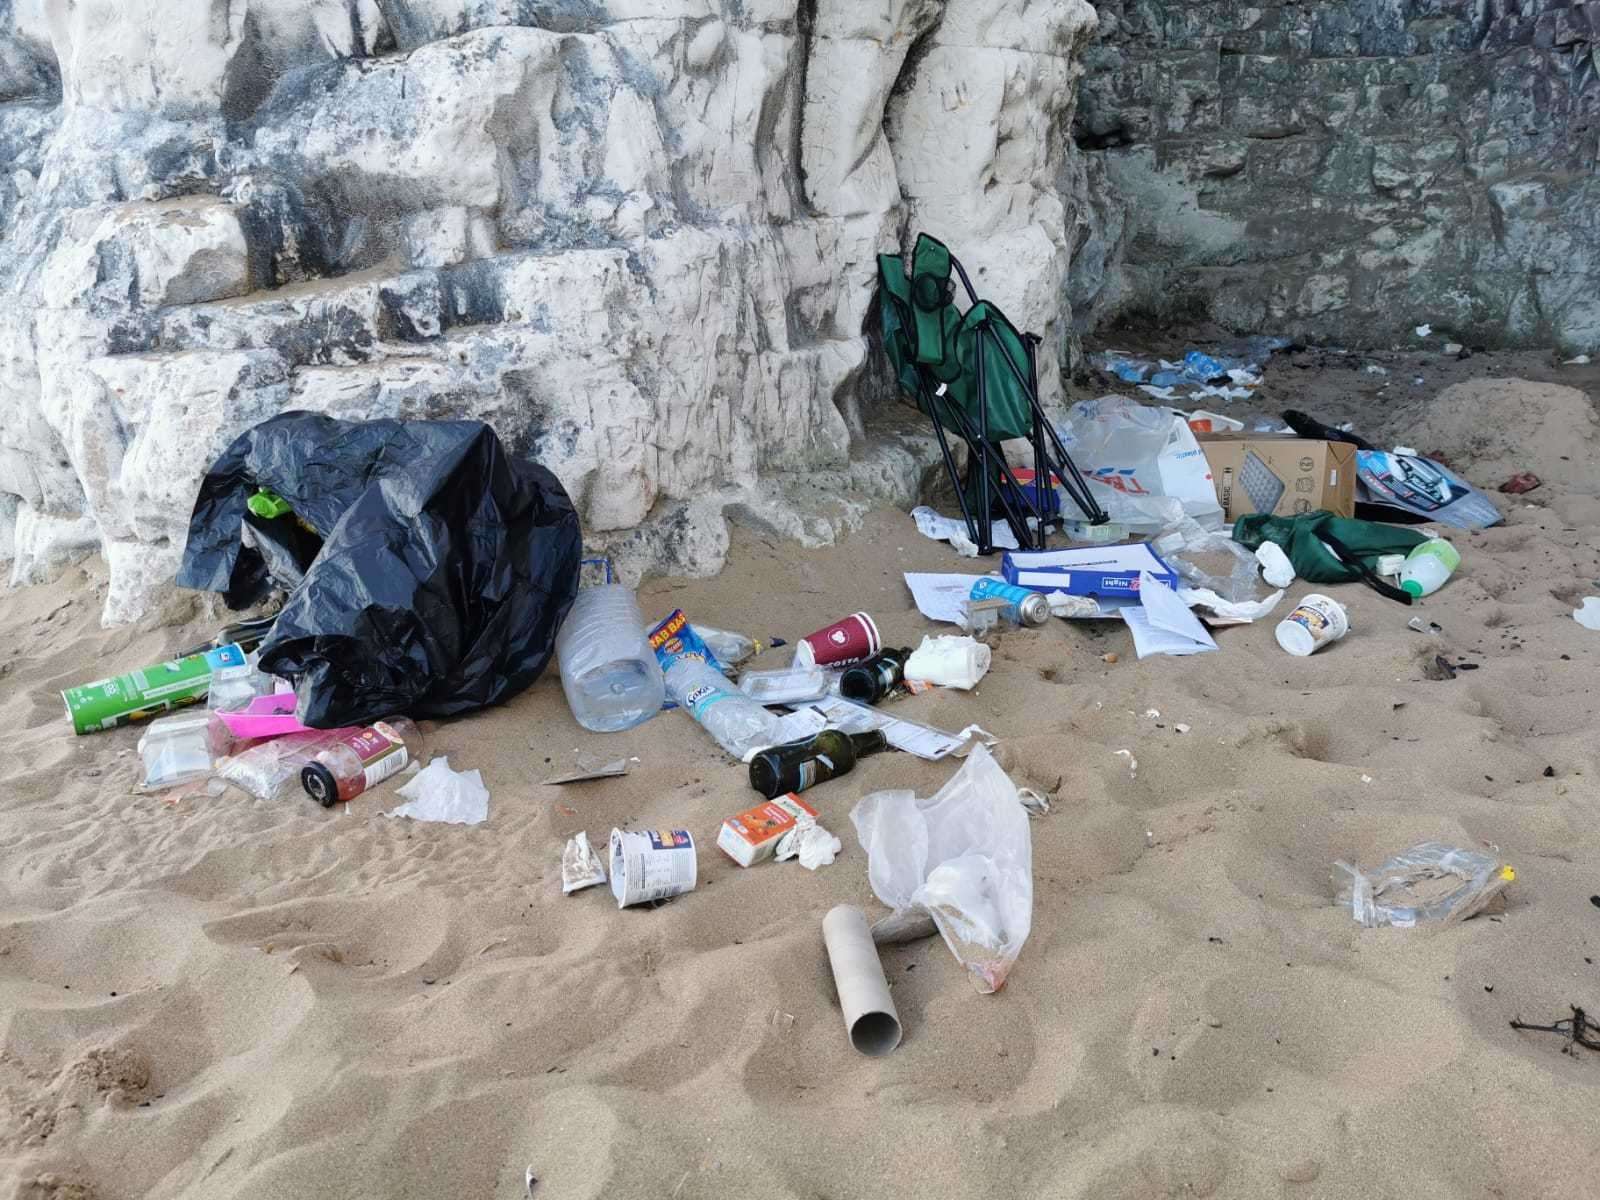 Just some of the rubbish left on the beach at Botany in Kingsgate